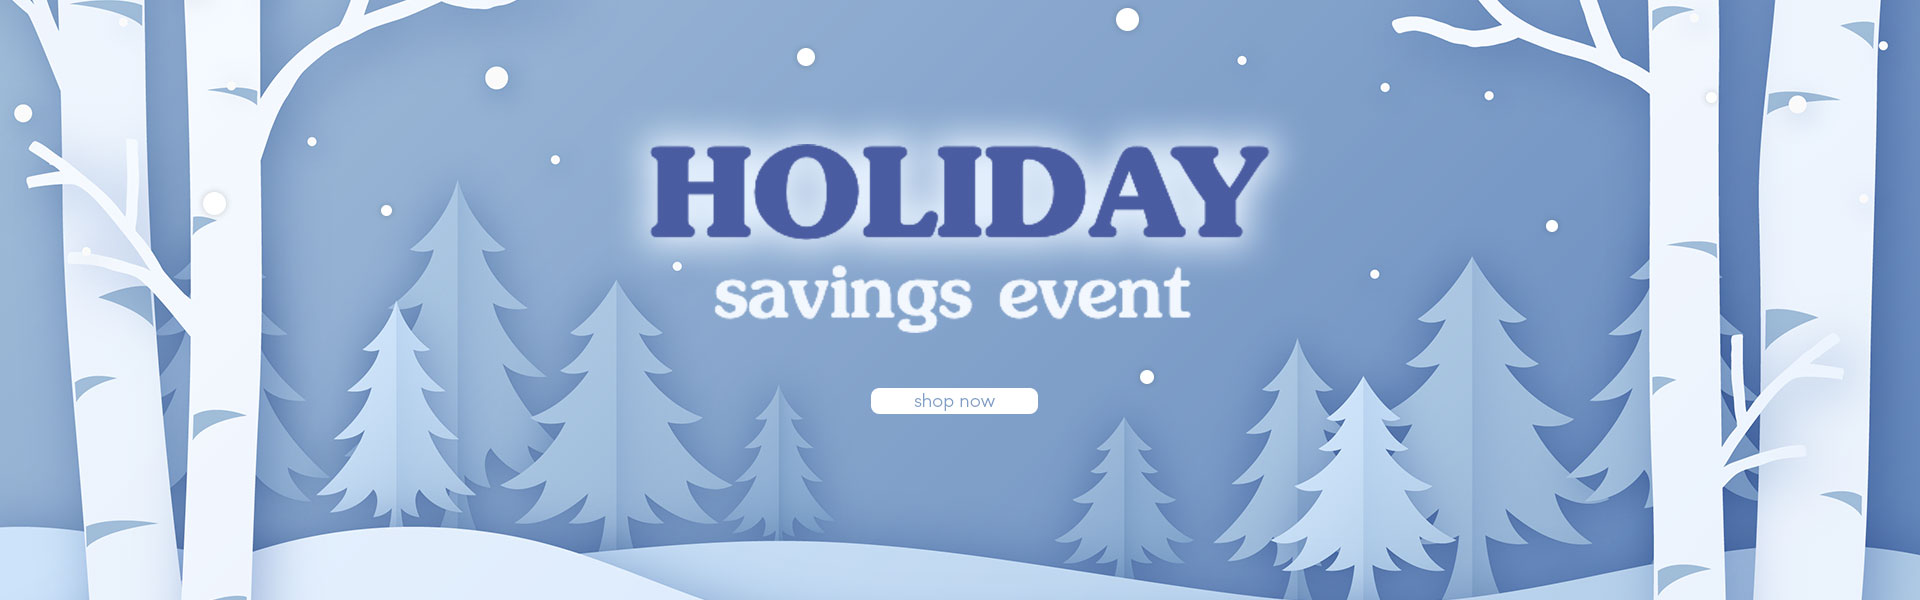 Holiday Savings Event - Shop Now